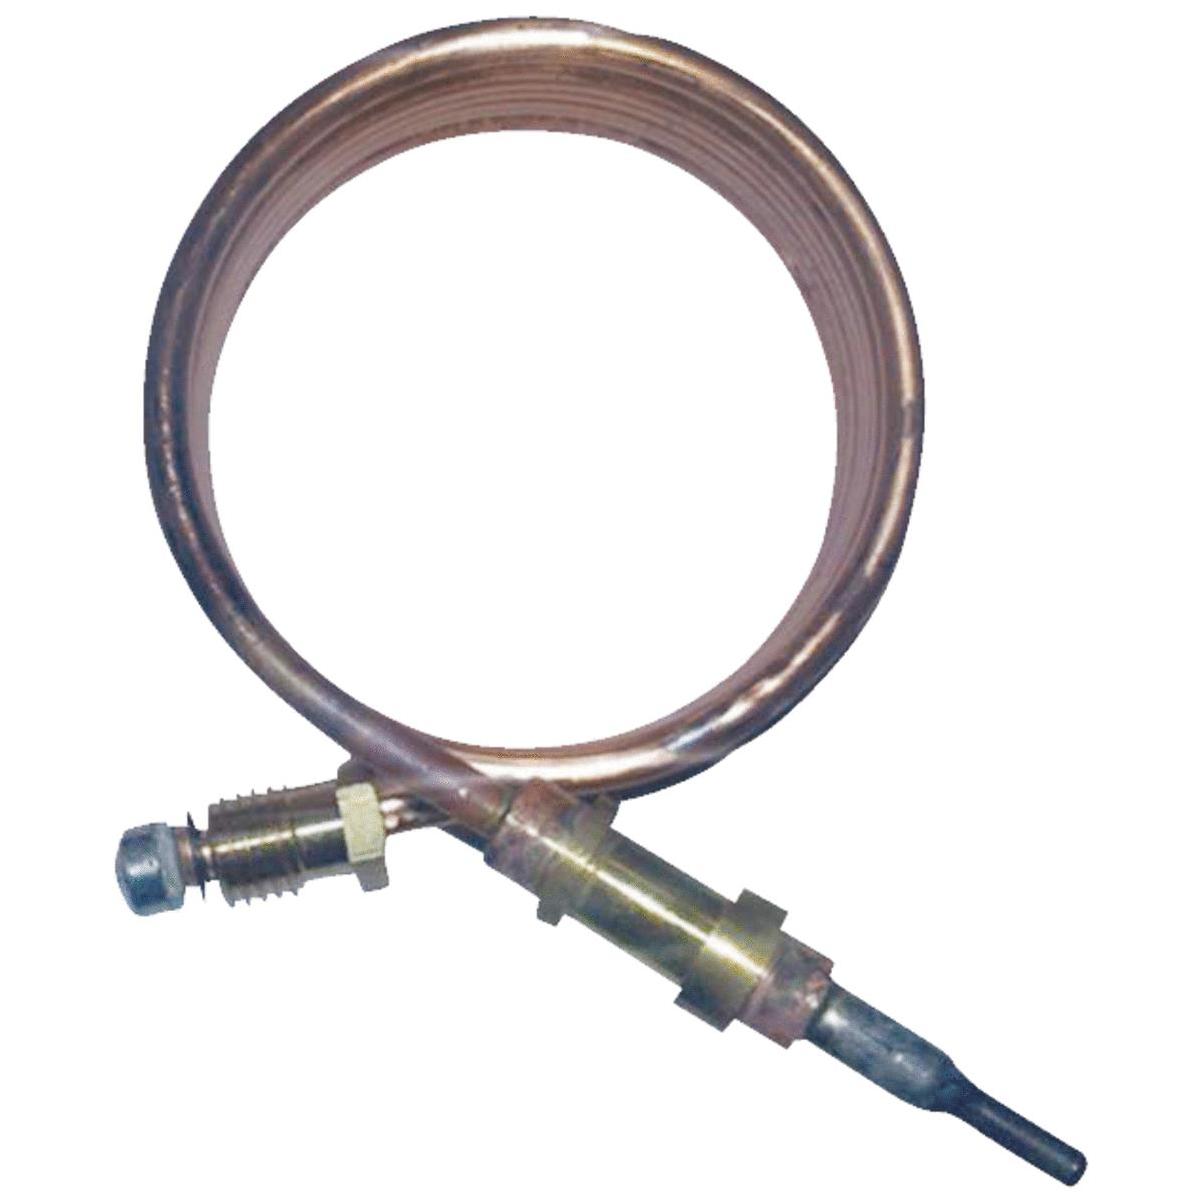 Reliance 24 In Universal Copper Thermocouple Kit 100108268-1 Each 